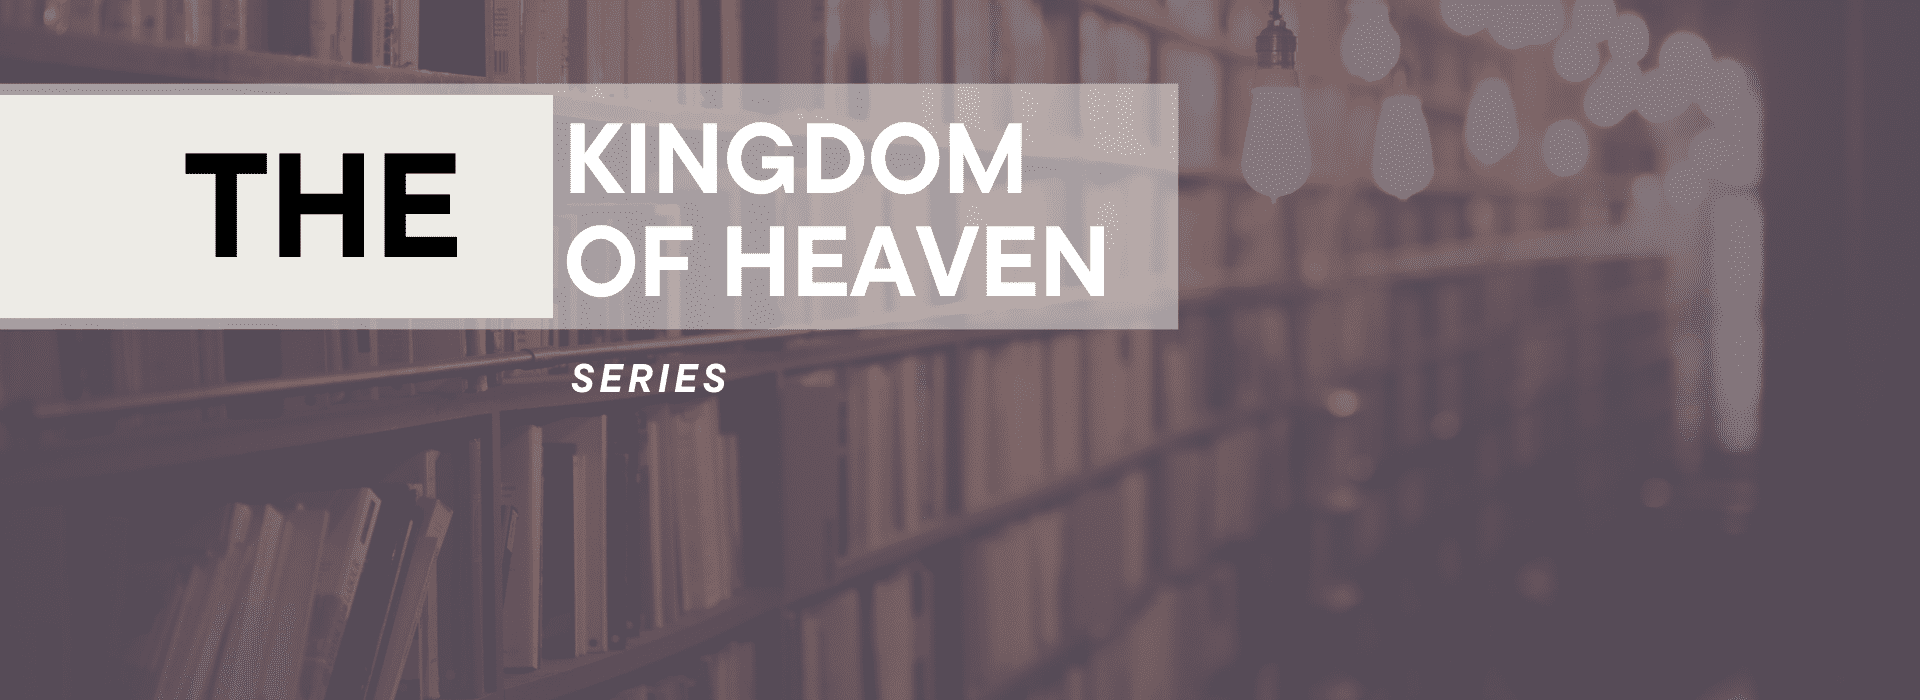 A book shelf filled with books and the words kingdom of heaven